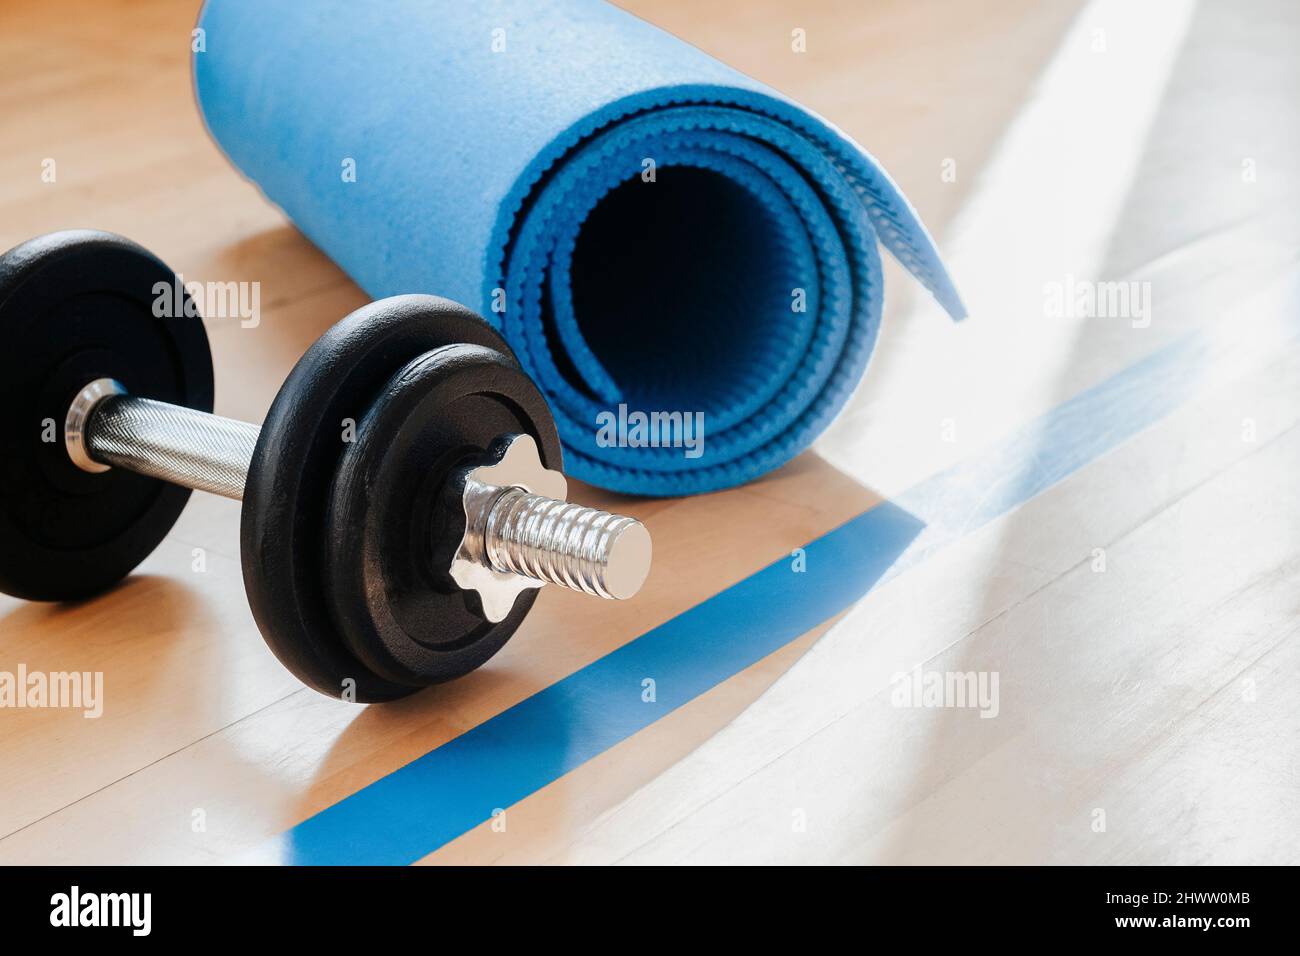 Blue color dumbbells and gym mat on wooden surface. Concept of rehabilitation and sport training equipment Stock Photo